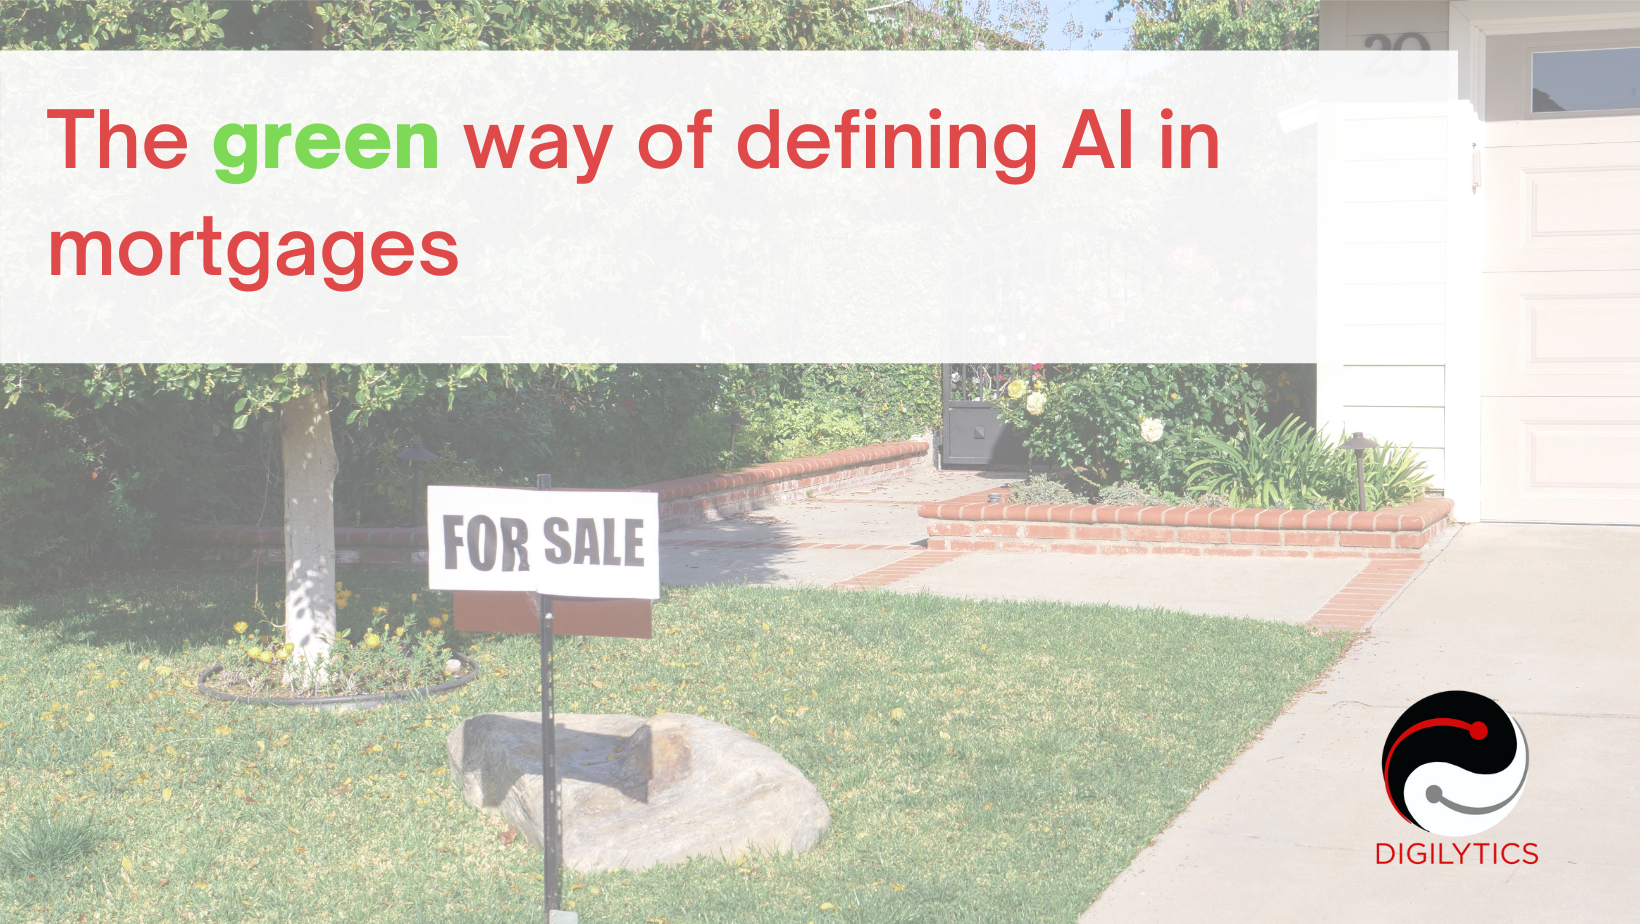 The green way of defining AI in mortgages